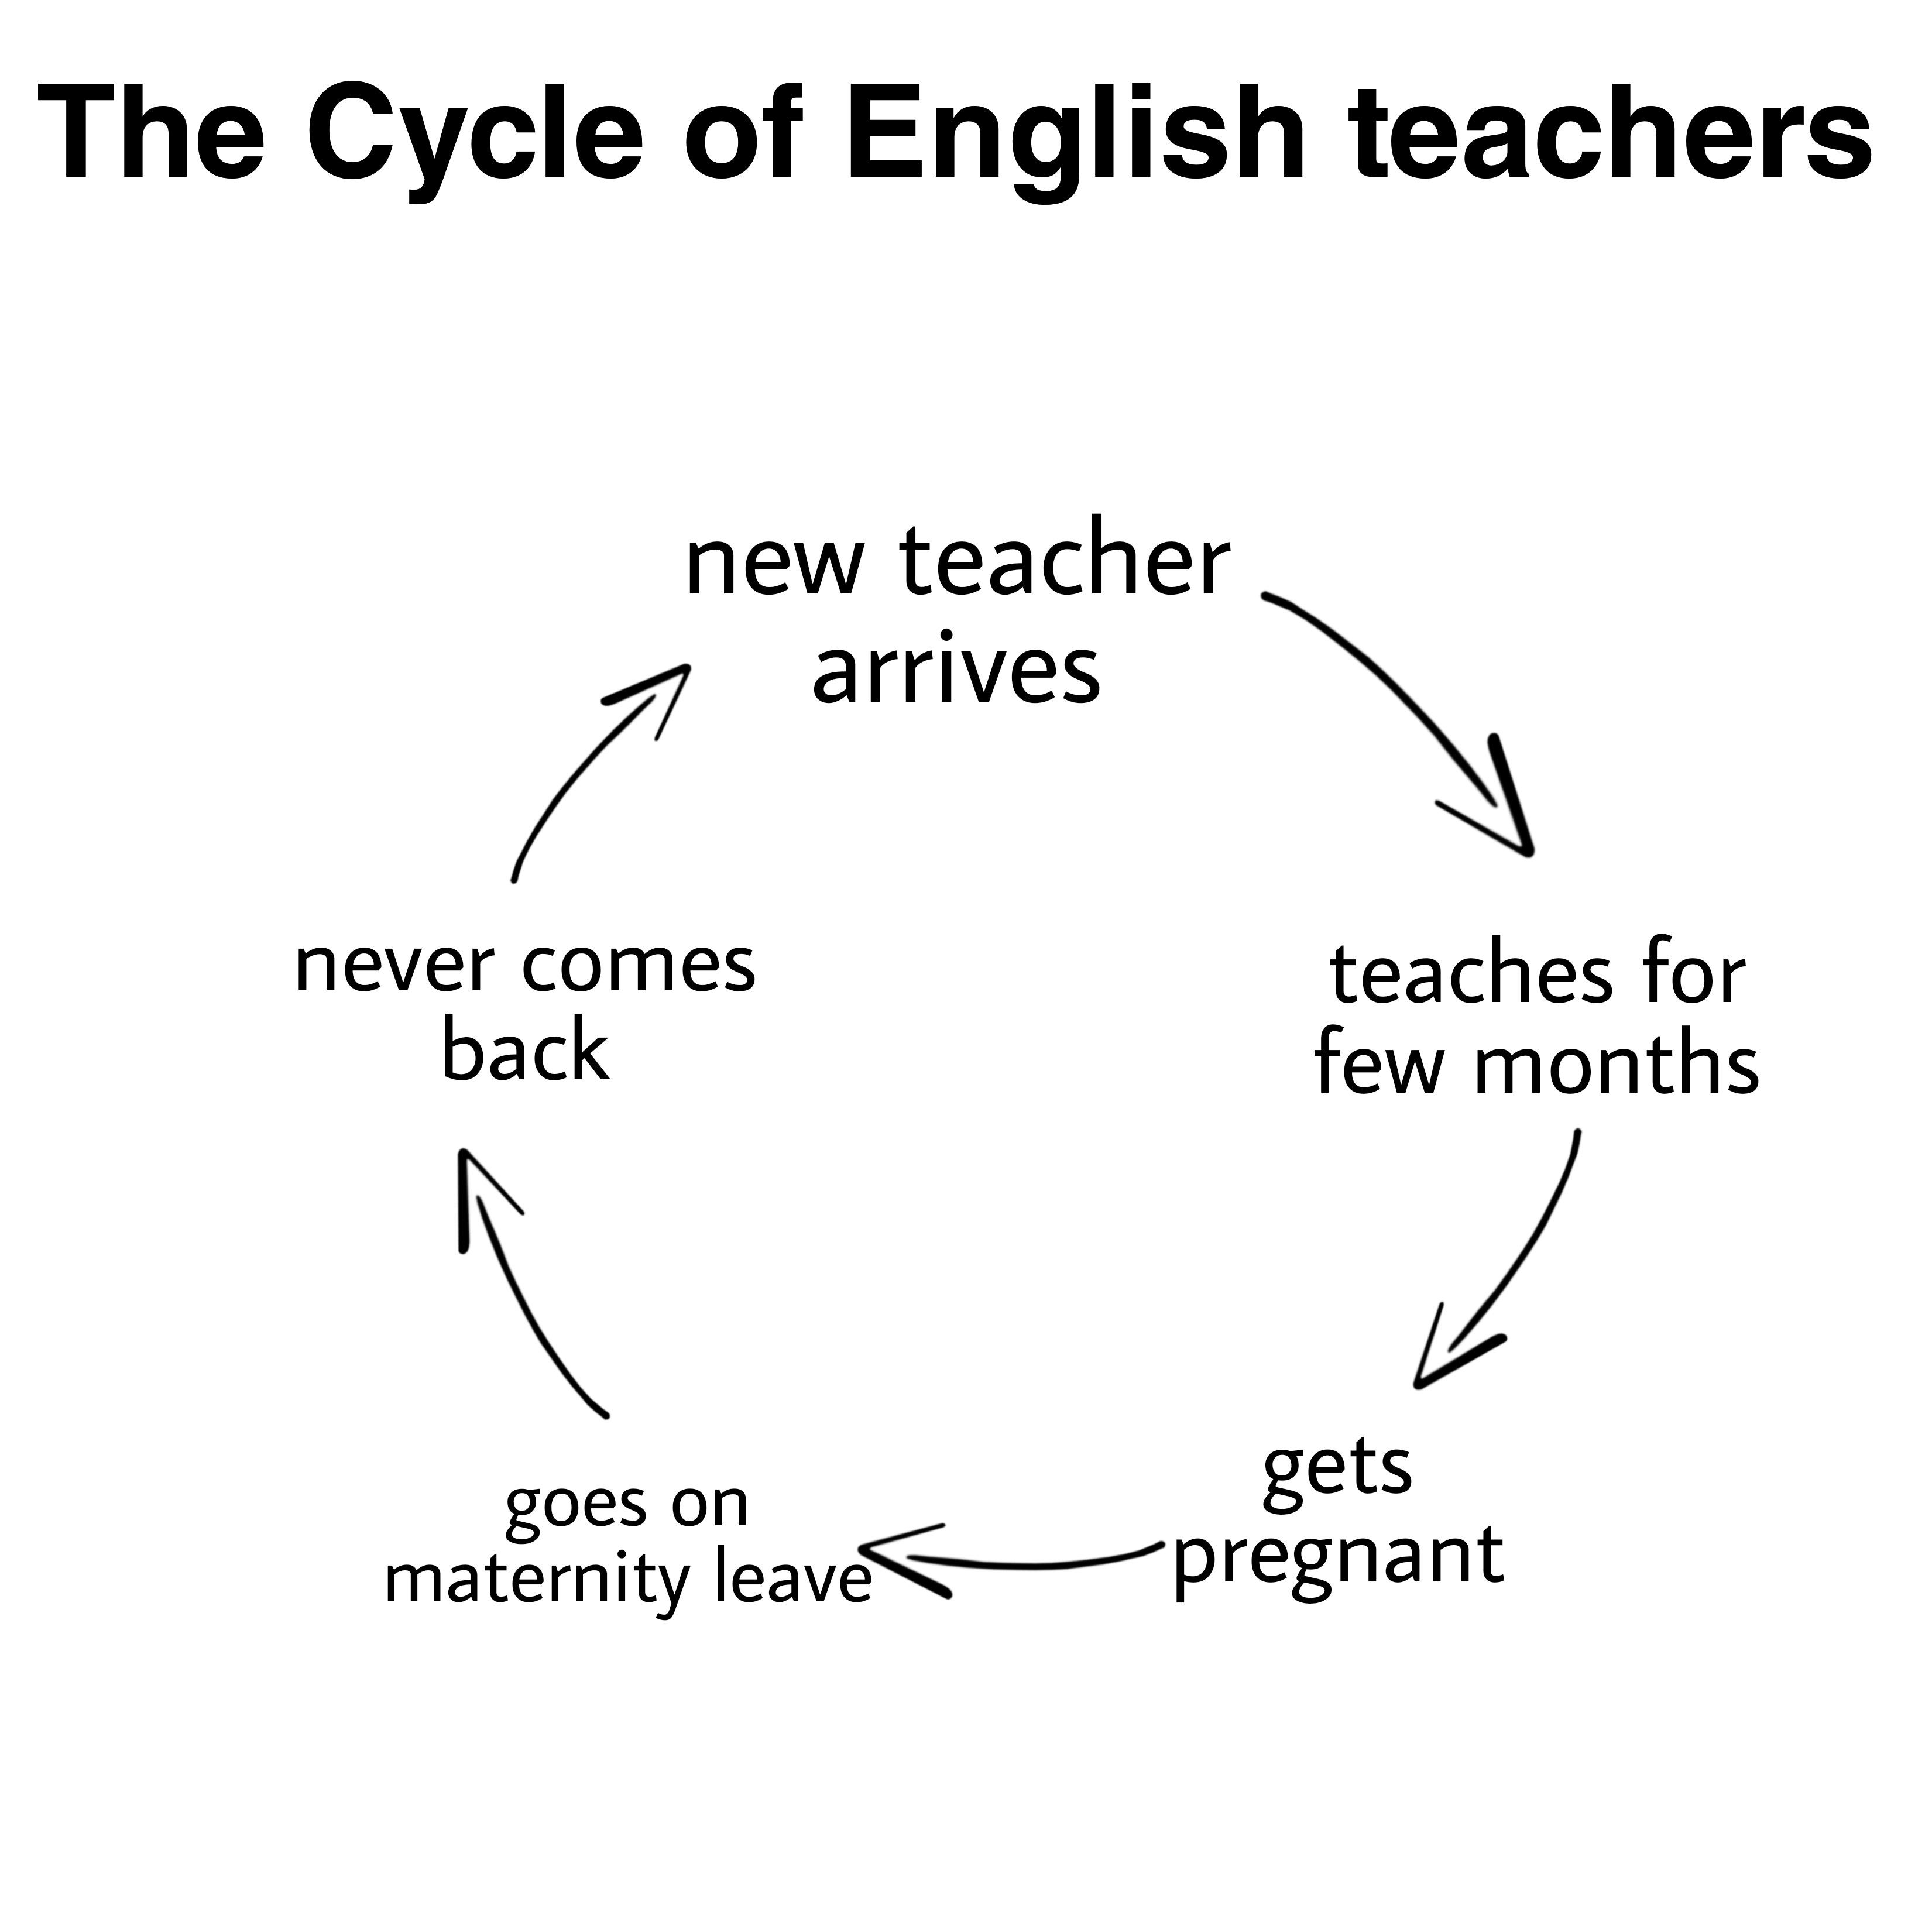 dank memes - funny memes - International Capital Budgeting - The Cycle of English teachers new teacher arrives never comes back teaches for few months goes on maternity leave gets pregnant